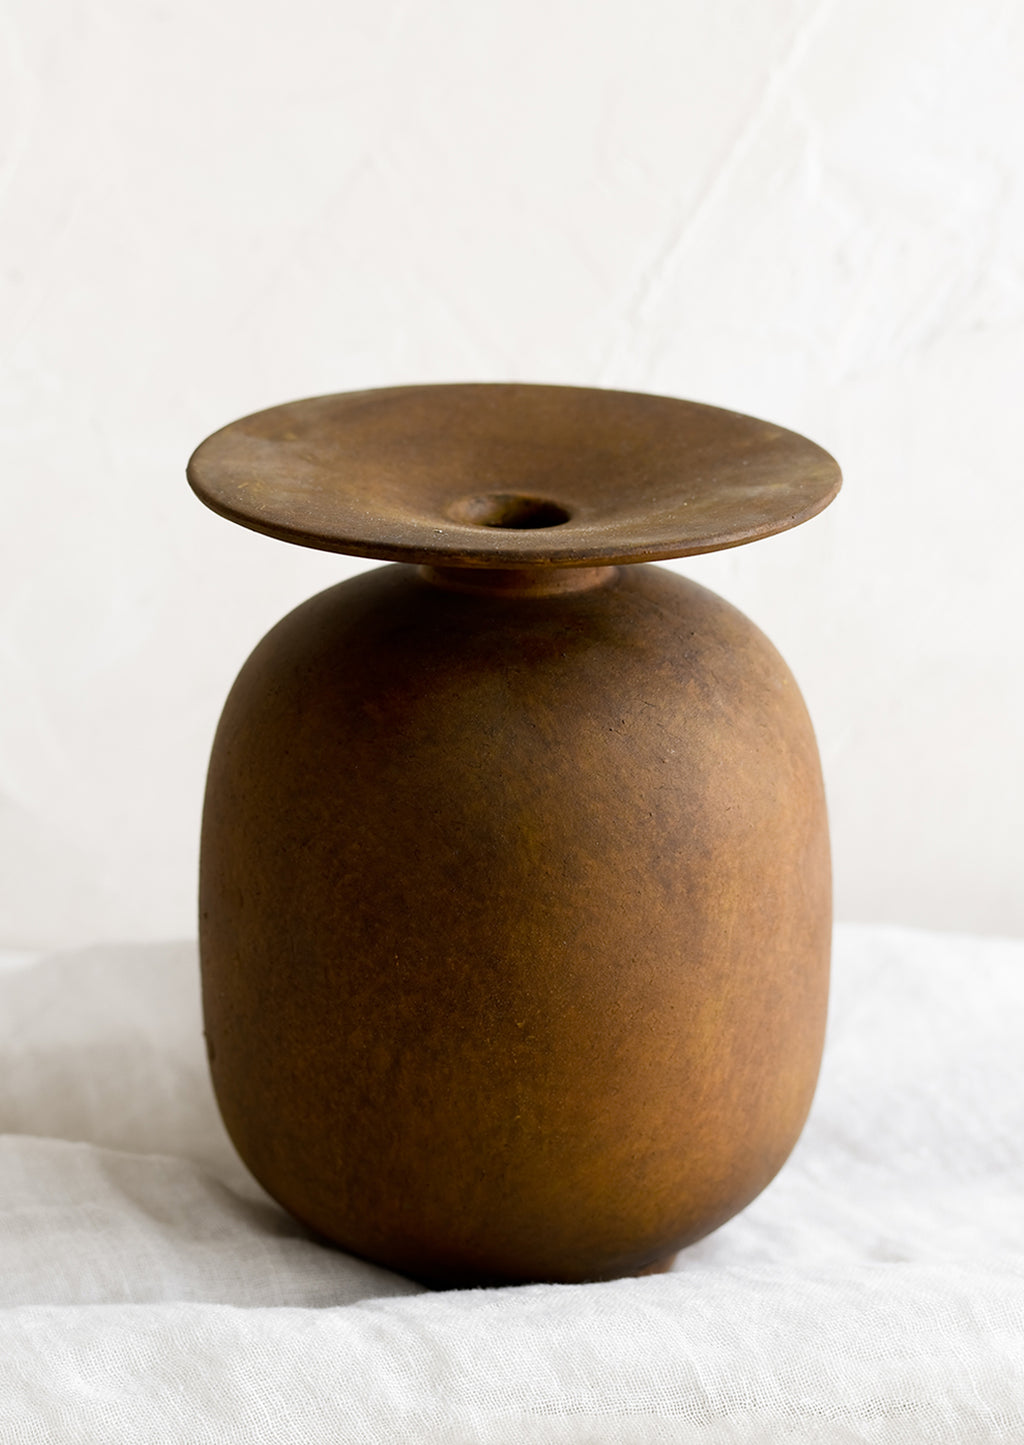 1: A brown distressed ceramic vase with saucer-like top.